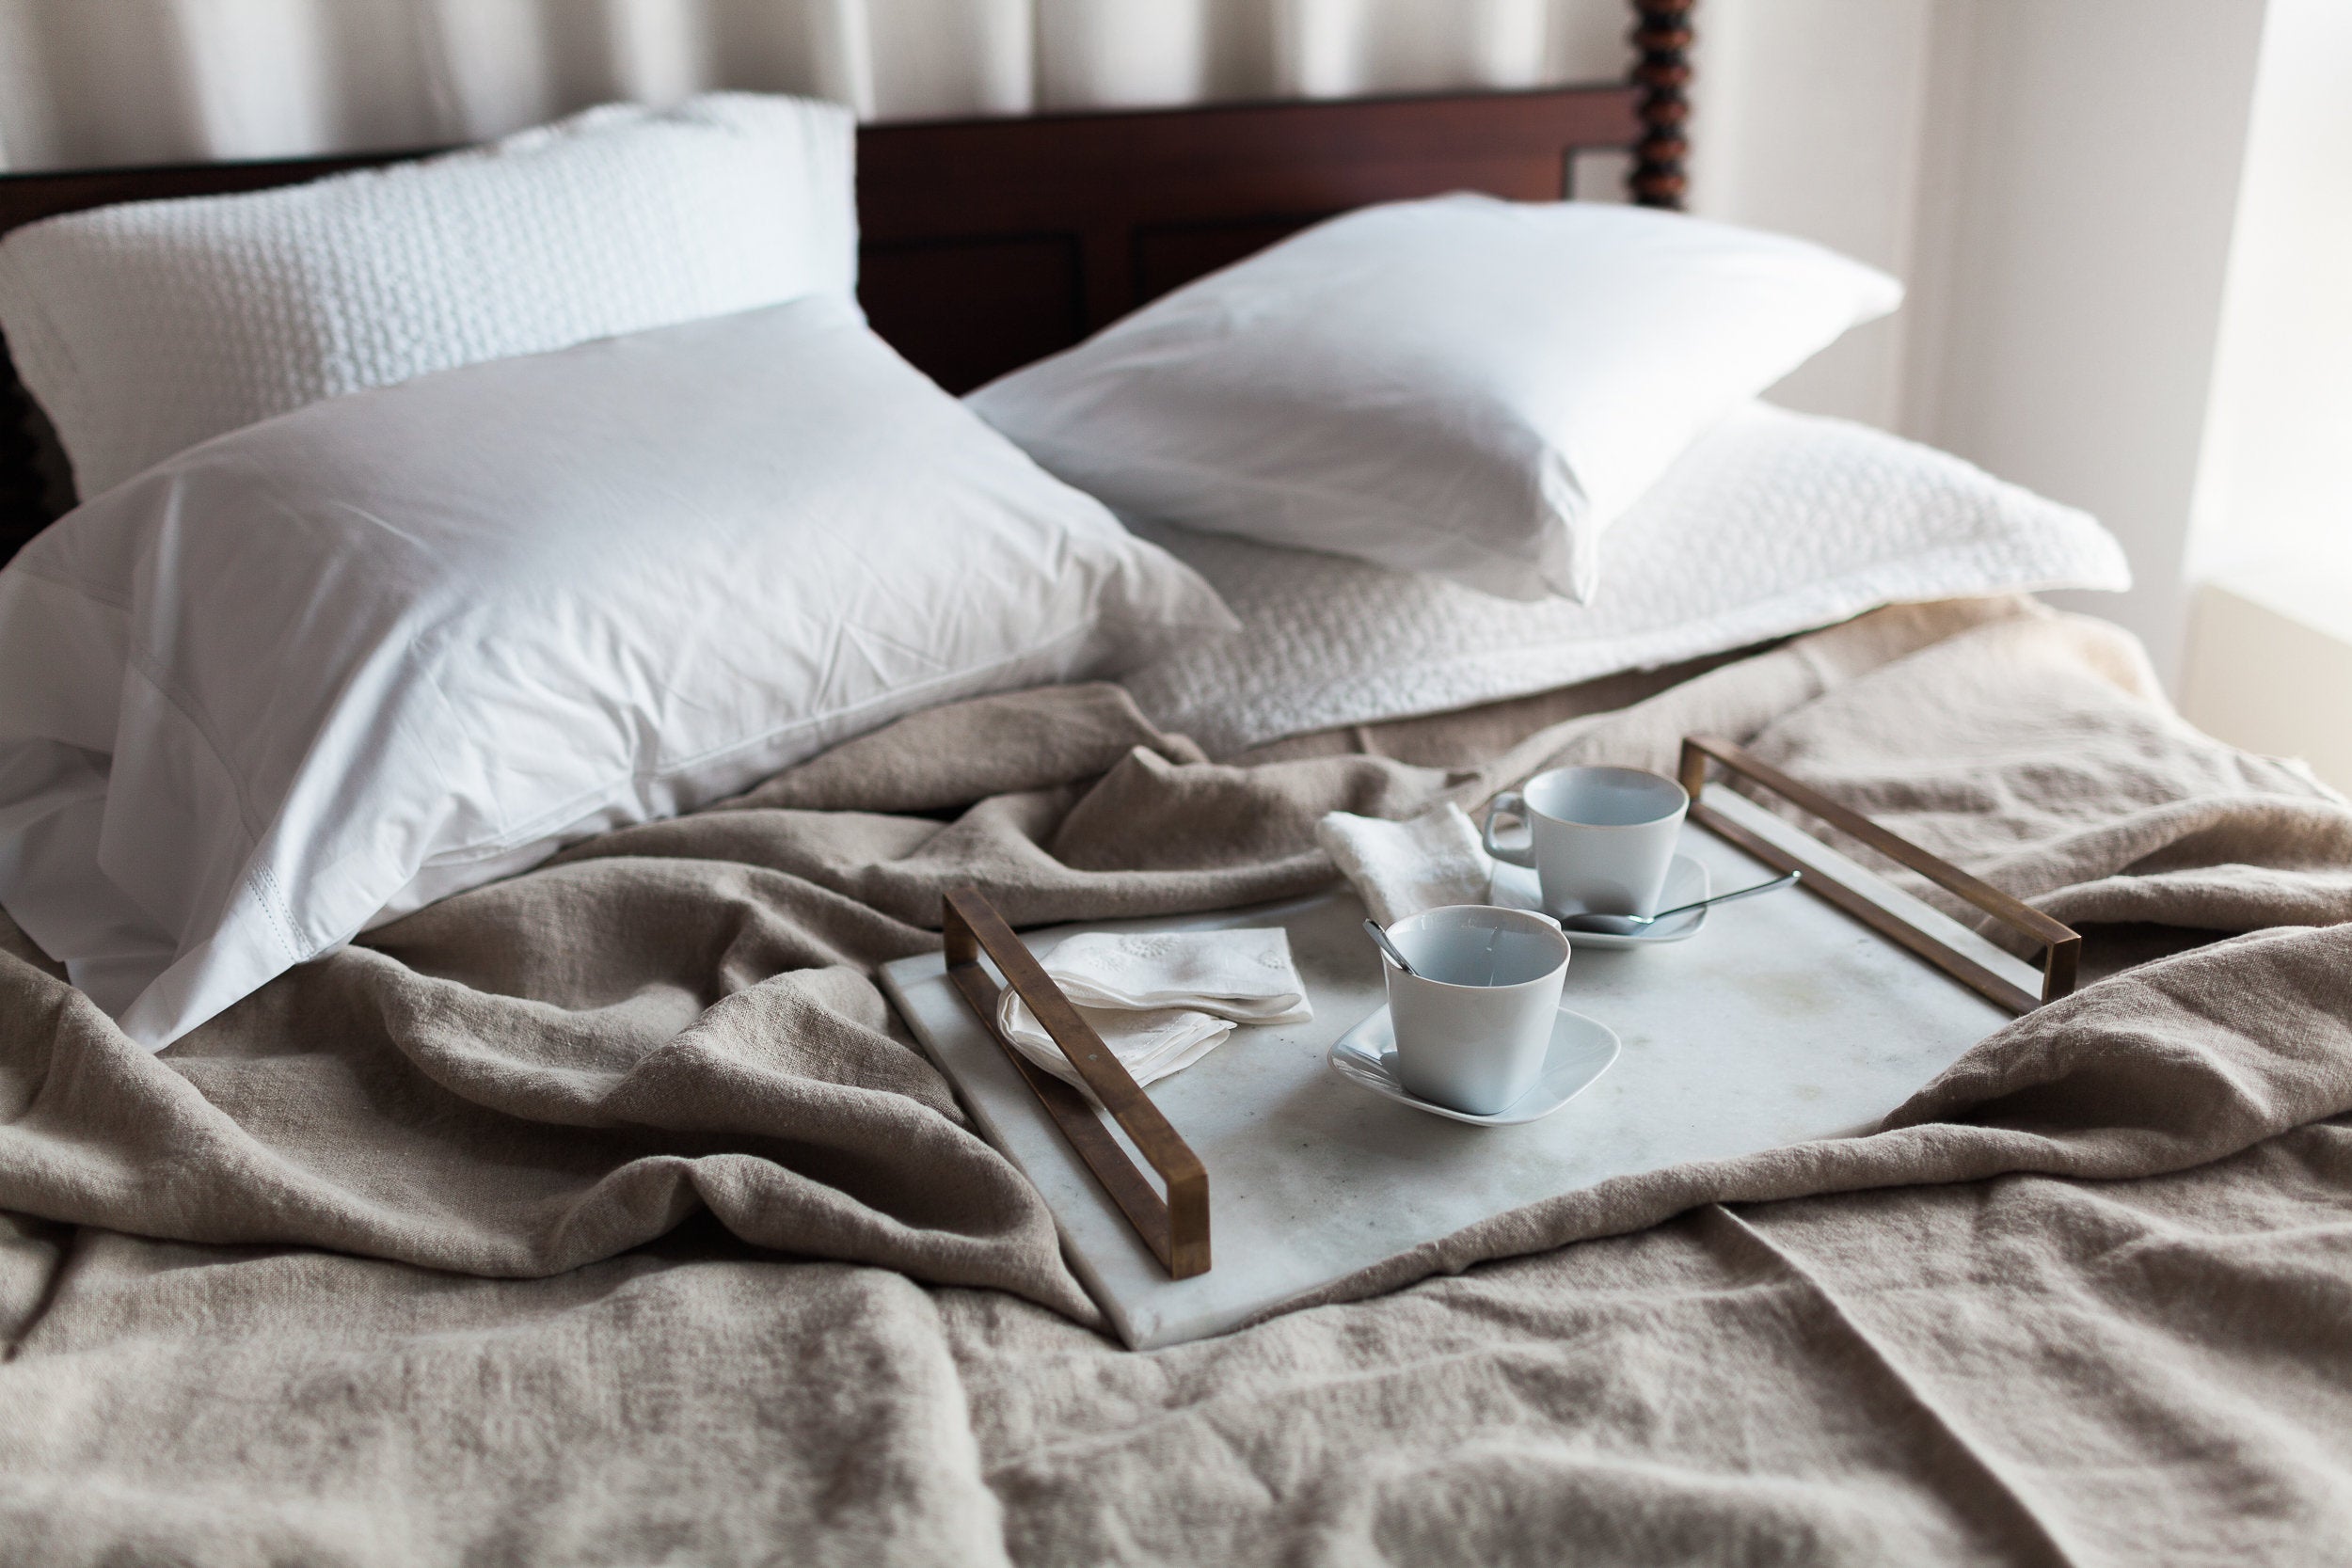 Messy bed featuring various textured linens with a breakfast tray and empty coffee cups